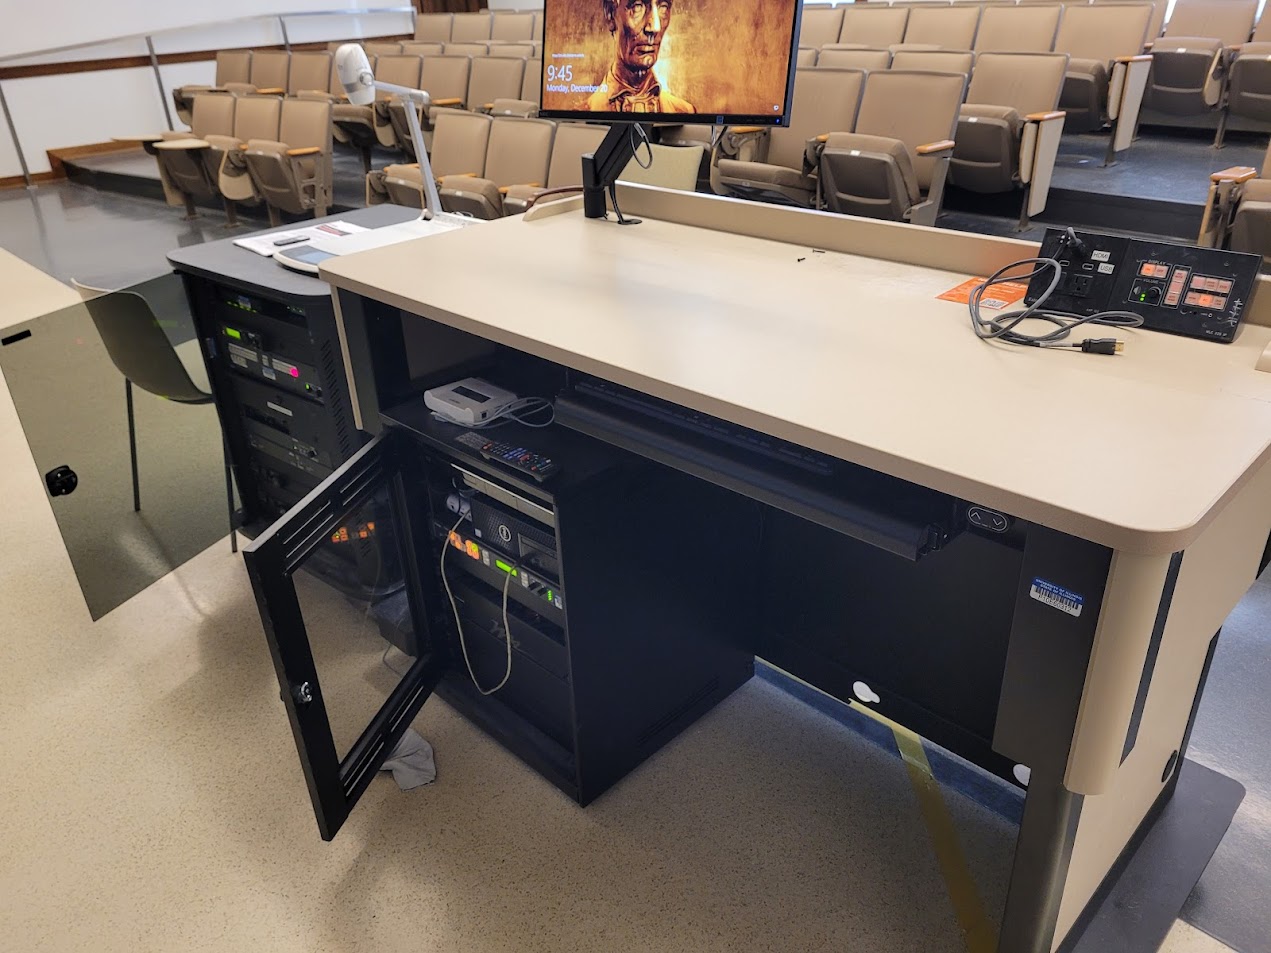 A view of the open cabinet with a computer monitor, HDMI inputs, a push button controller, document camera, and audio visual rack.